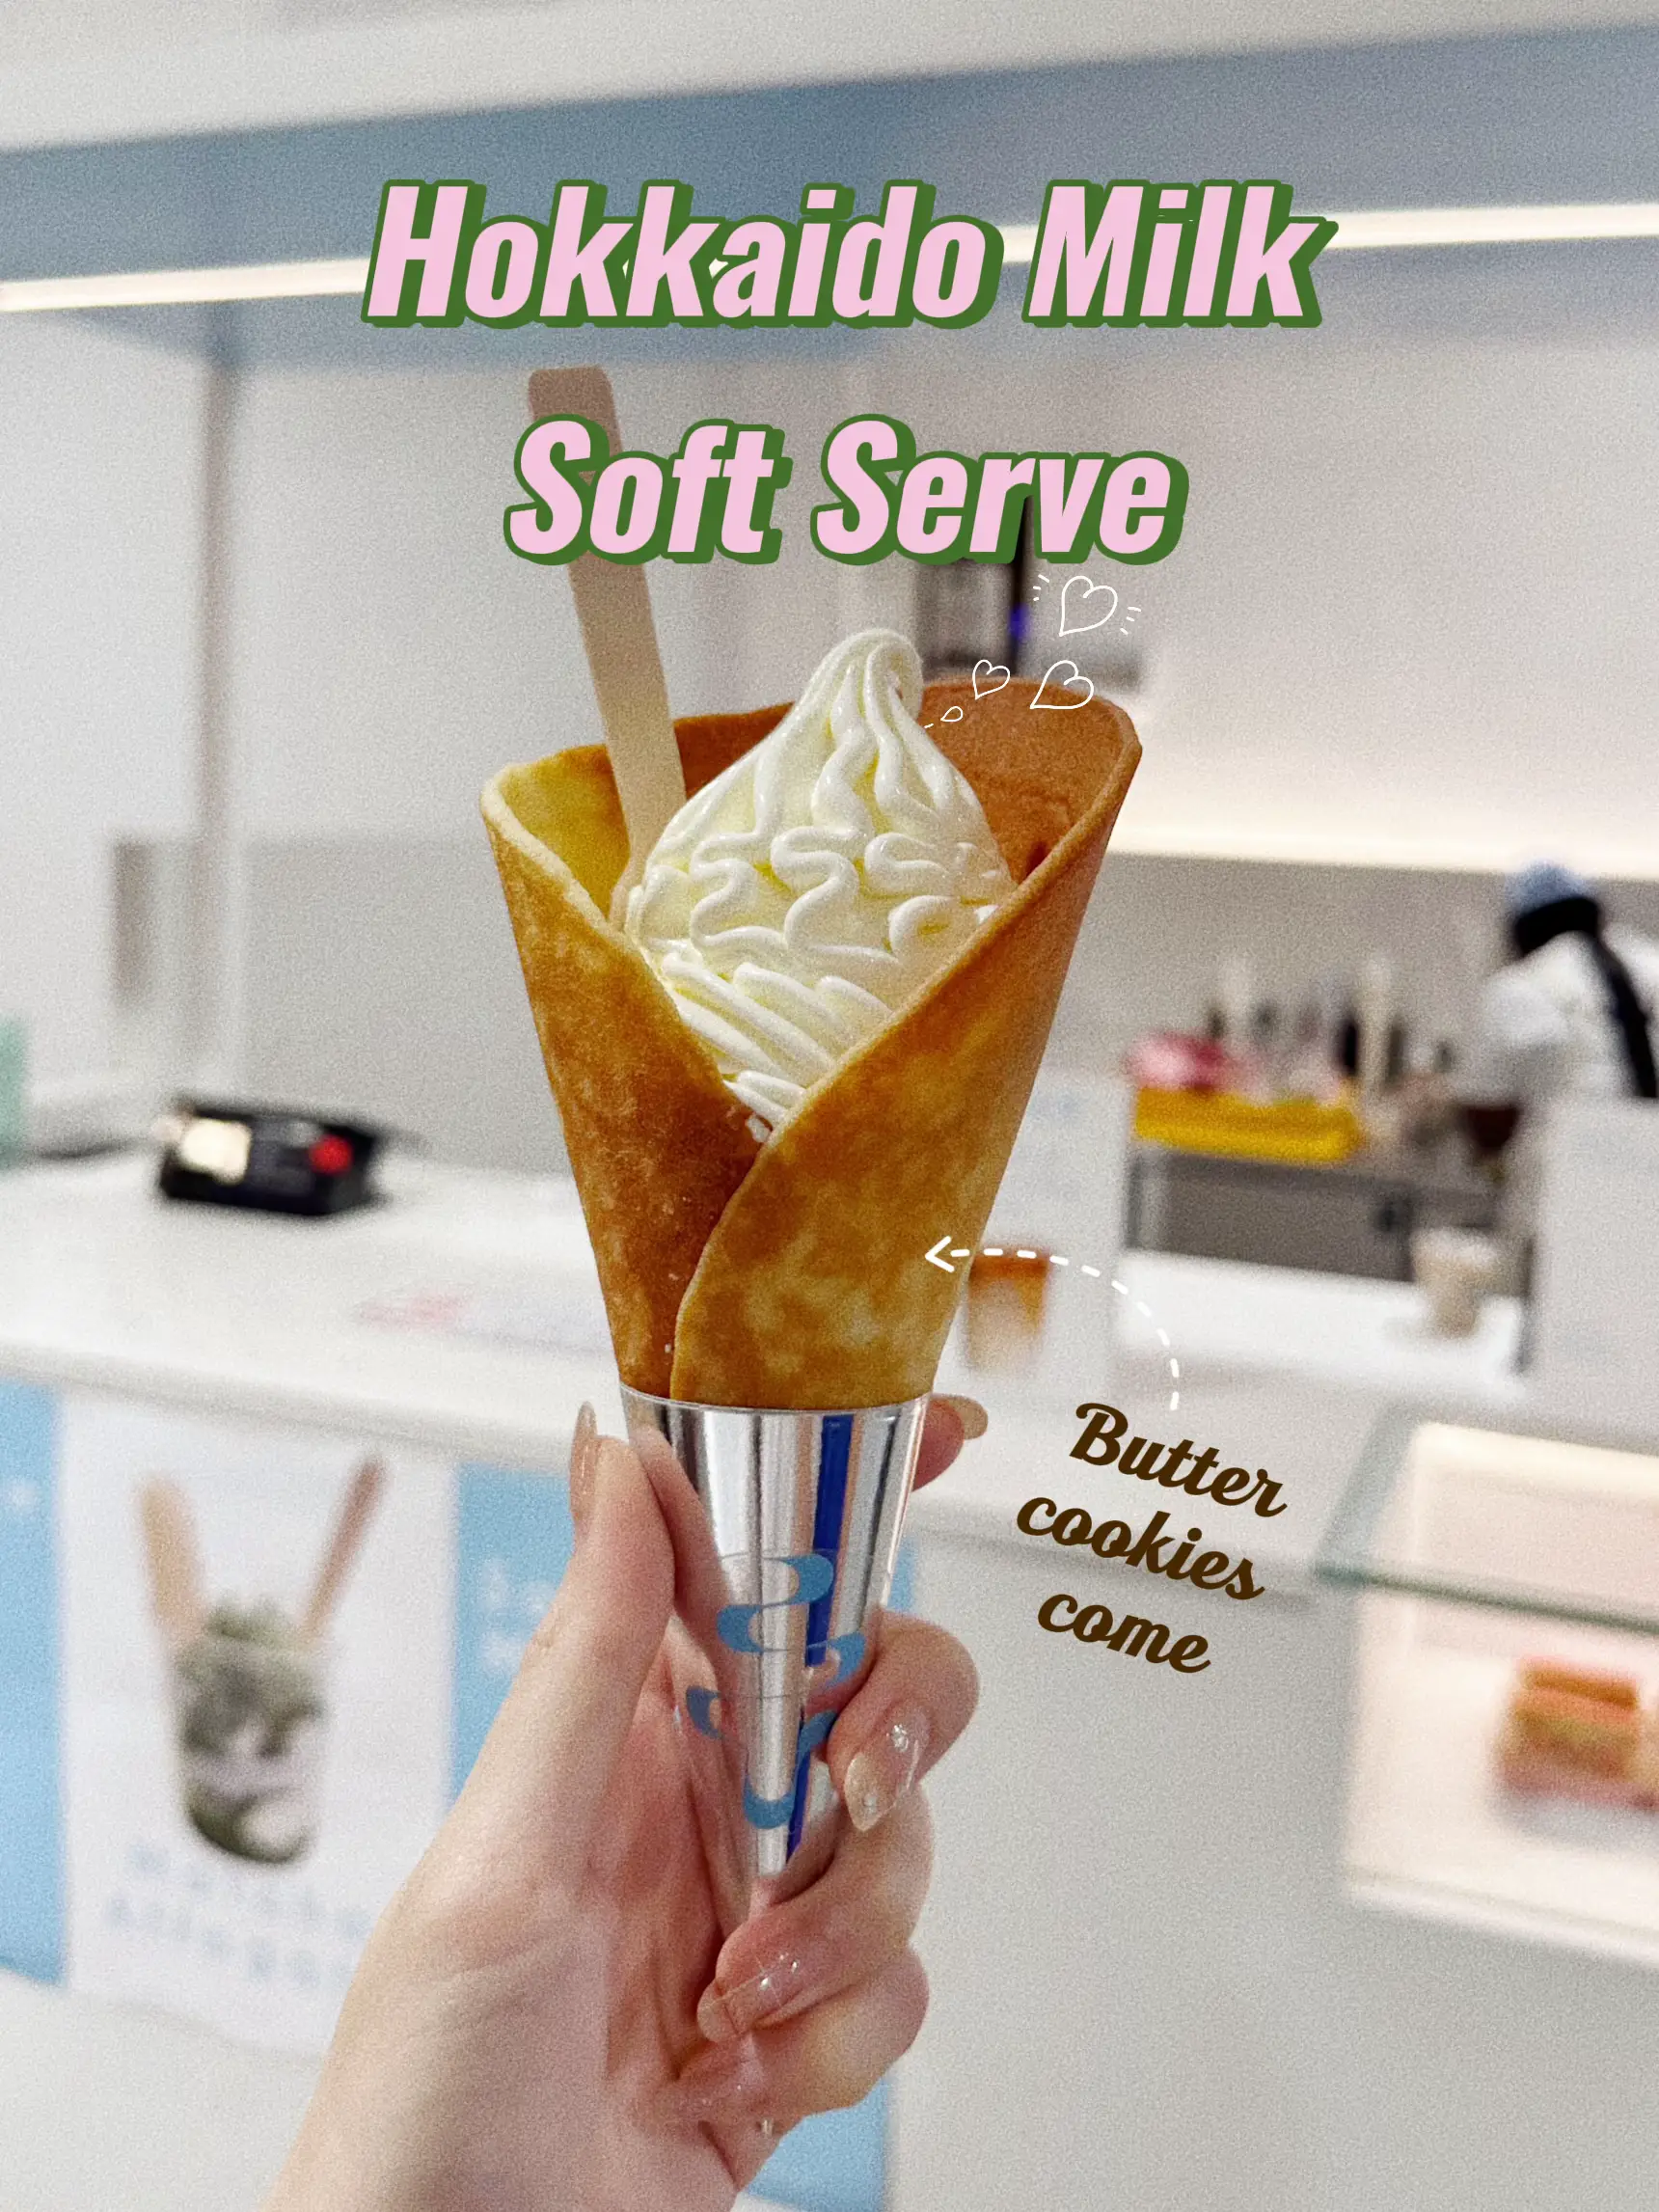 SOFT SERVE WITH BUTTER COOKIES CONE ?!?!'s images